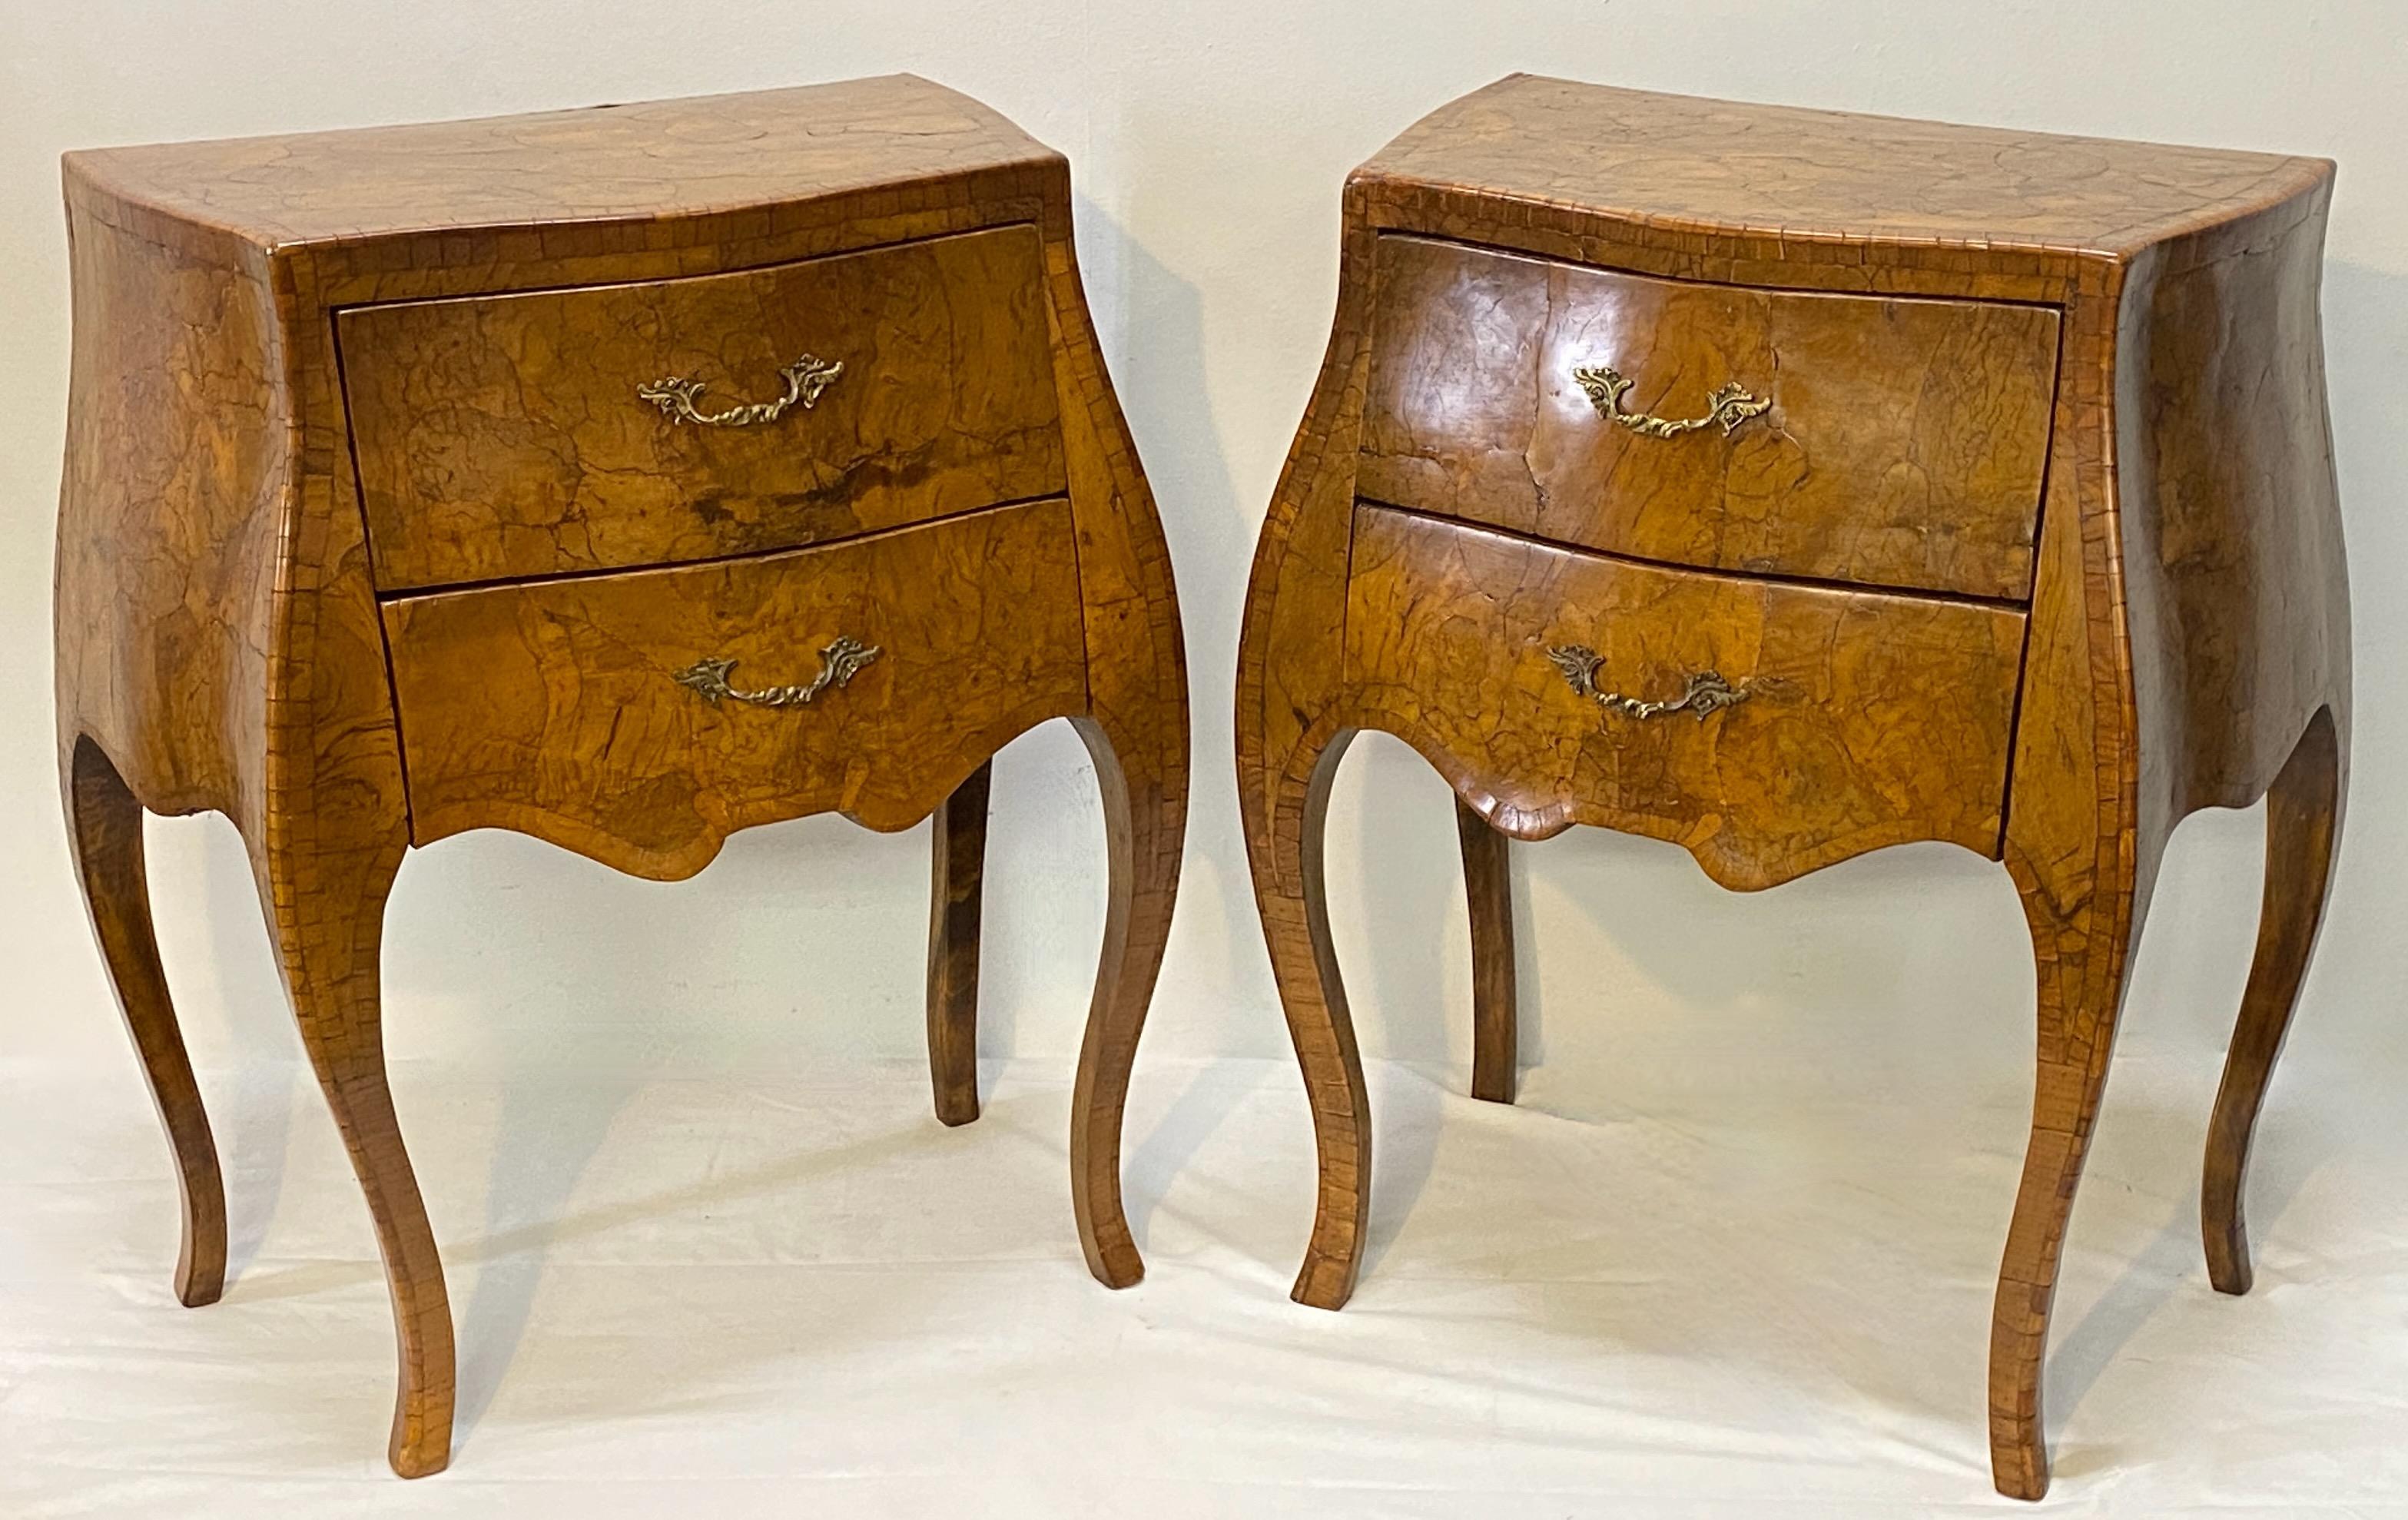 A pair of beautifully hand made bedside chest of drawers with thick highly figural walnut patch work veneer over solid pine. 
Excellent quality, great shape and style, in remarkable antique condition.
Having custom cut glass tops measuring 20.5 wide